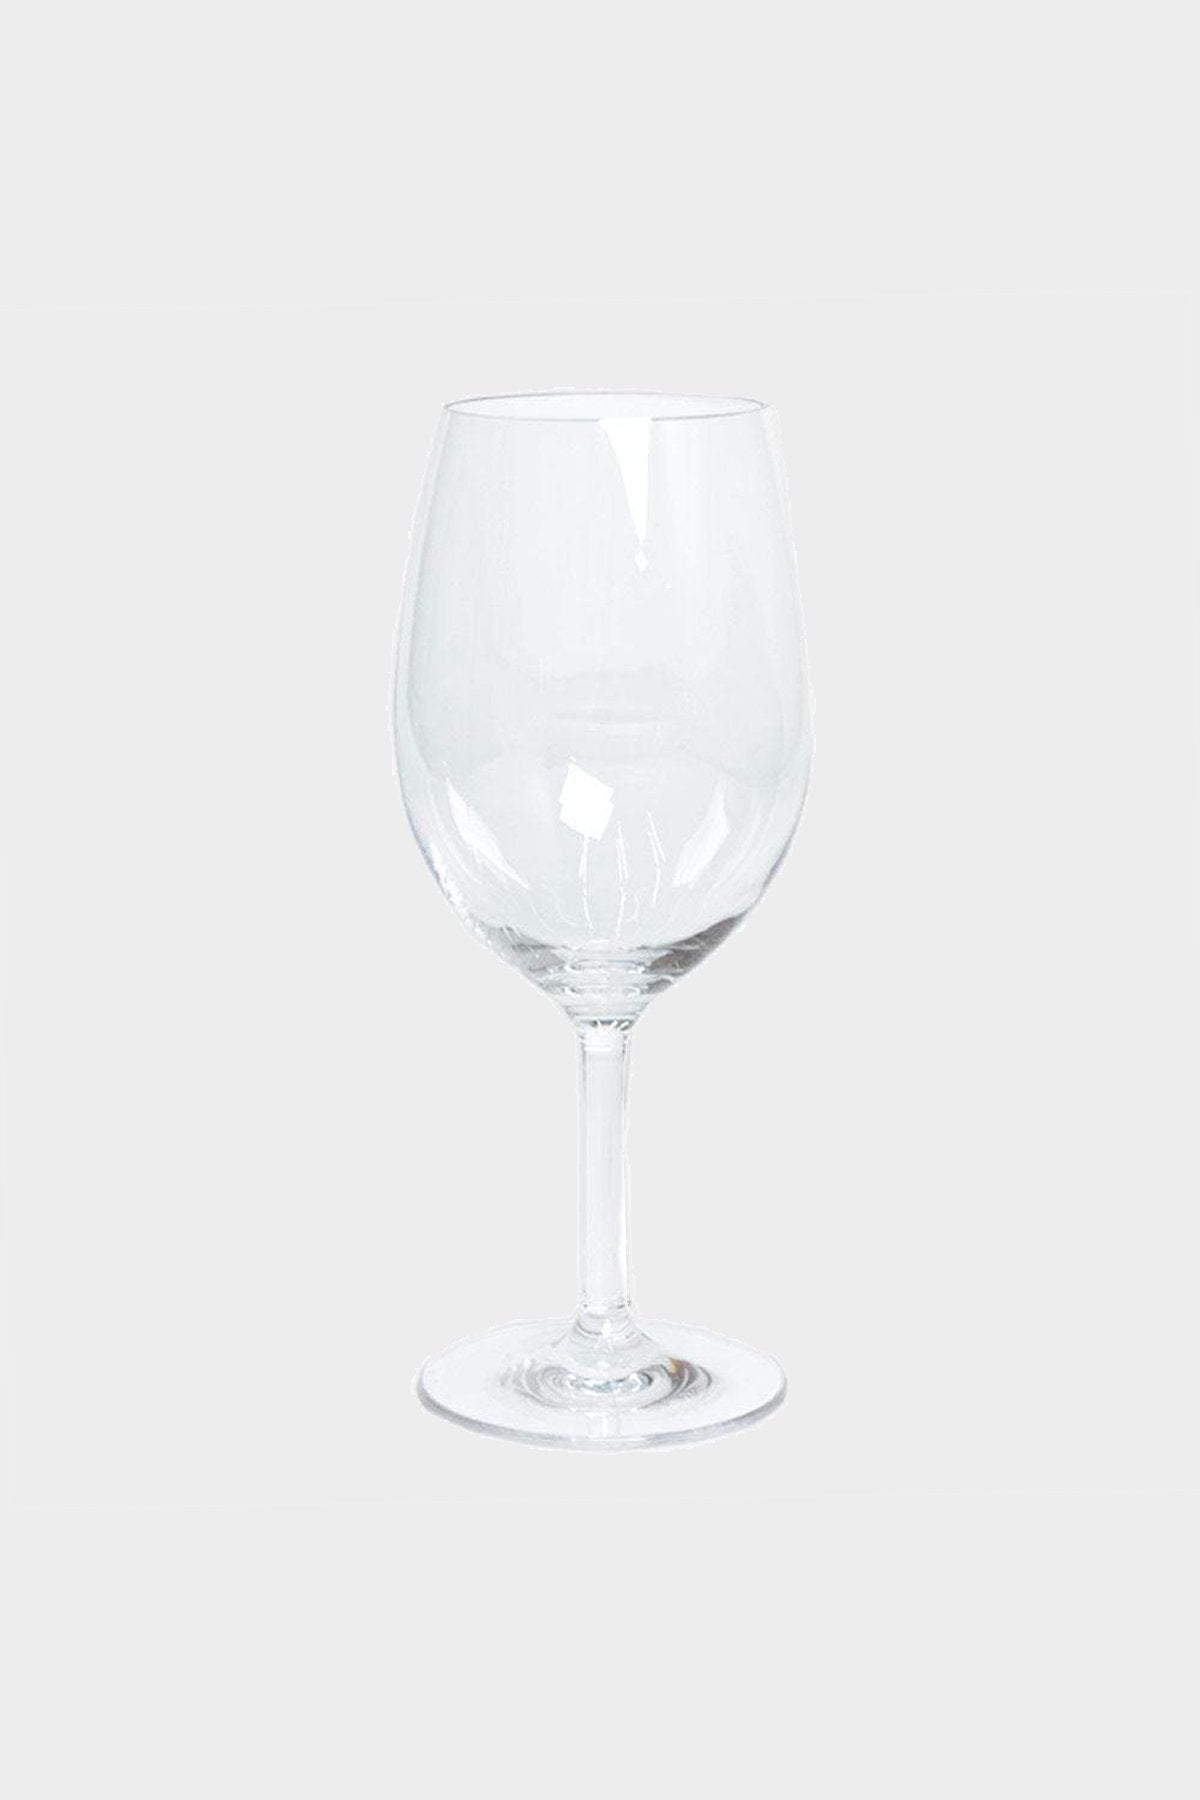 Acrylic 20.5oz Wine Glasses in Crystal Clear - shop-olivia.com